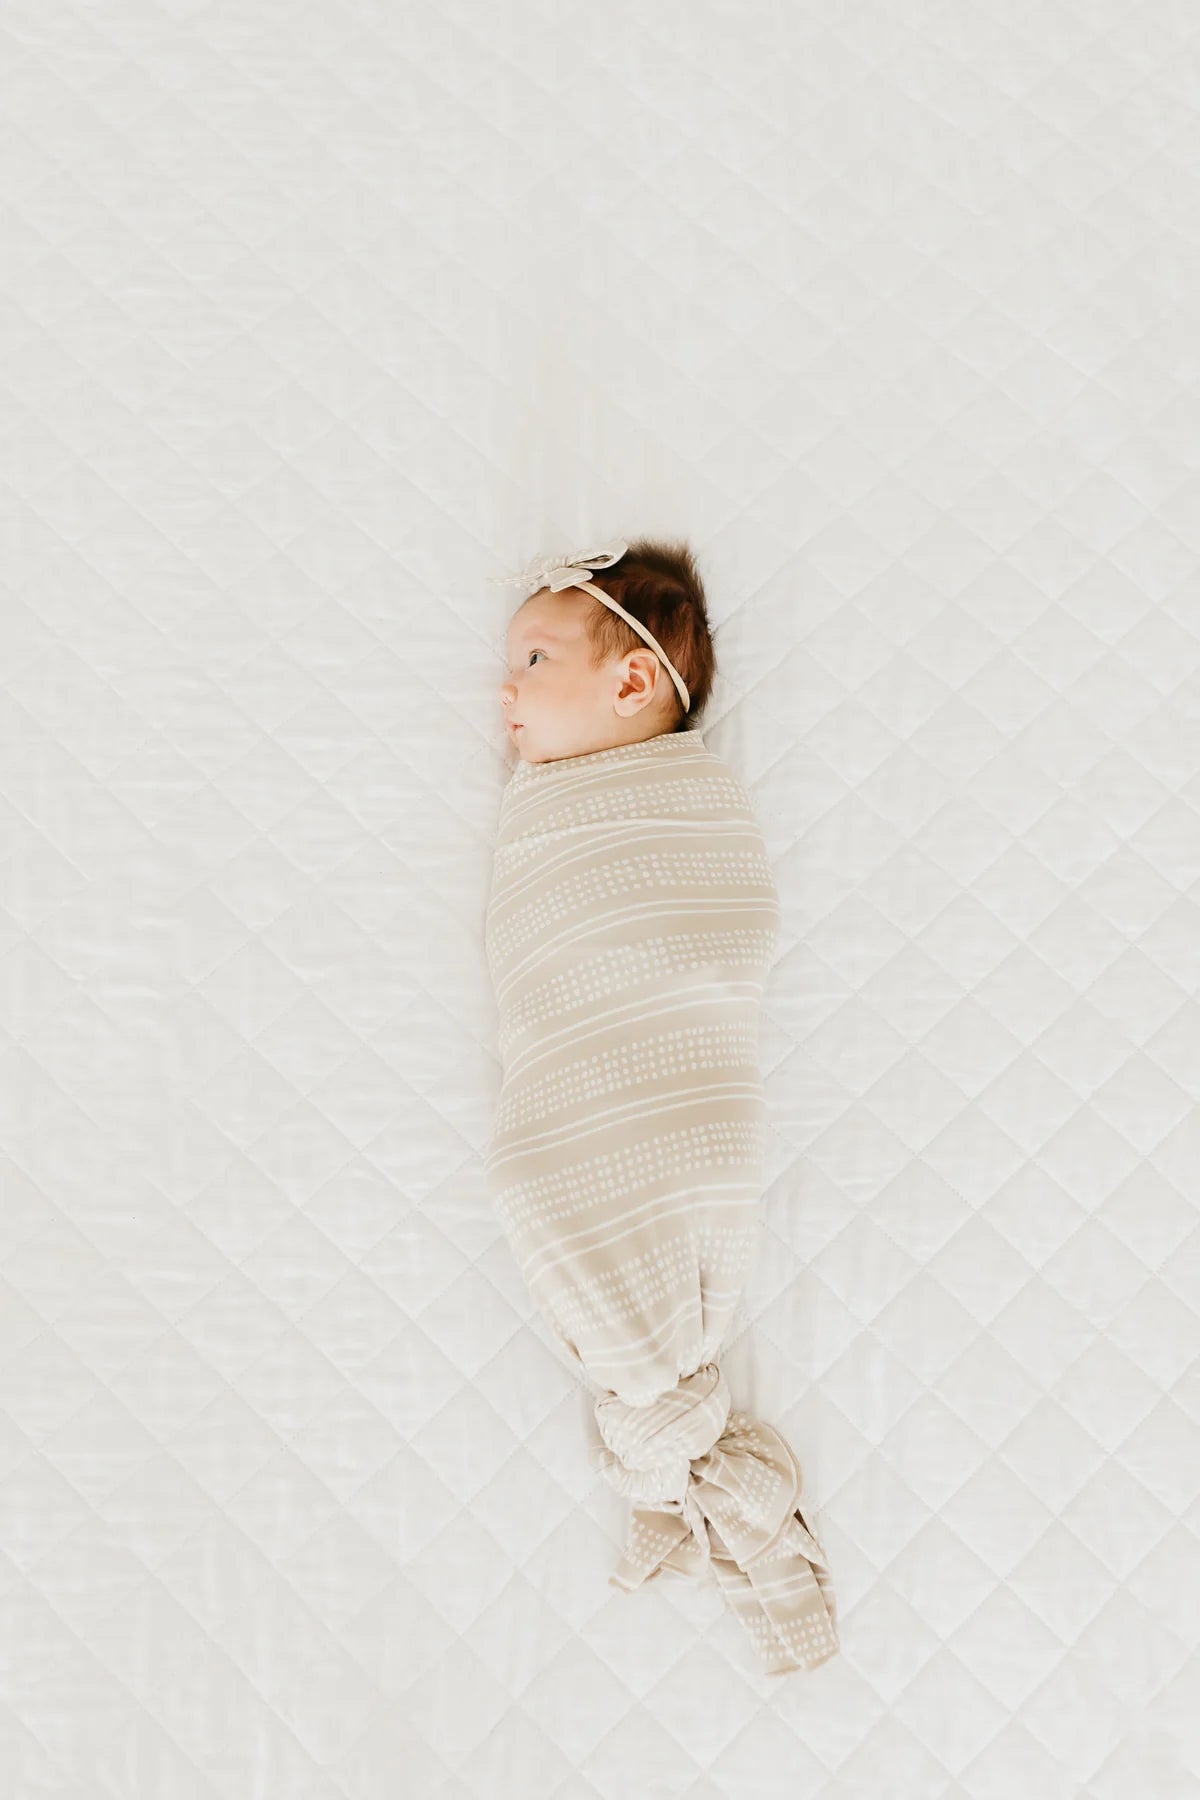 Copper Pearl - Clay Swaddle Blanket